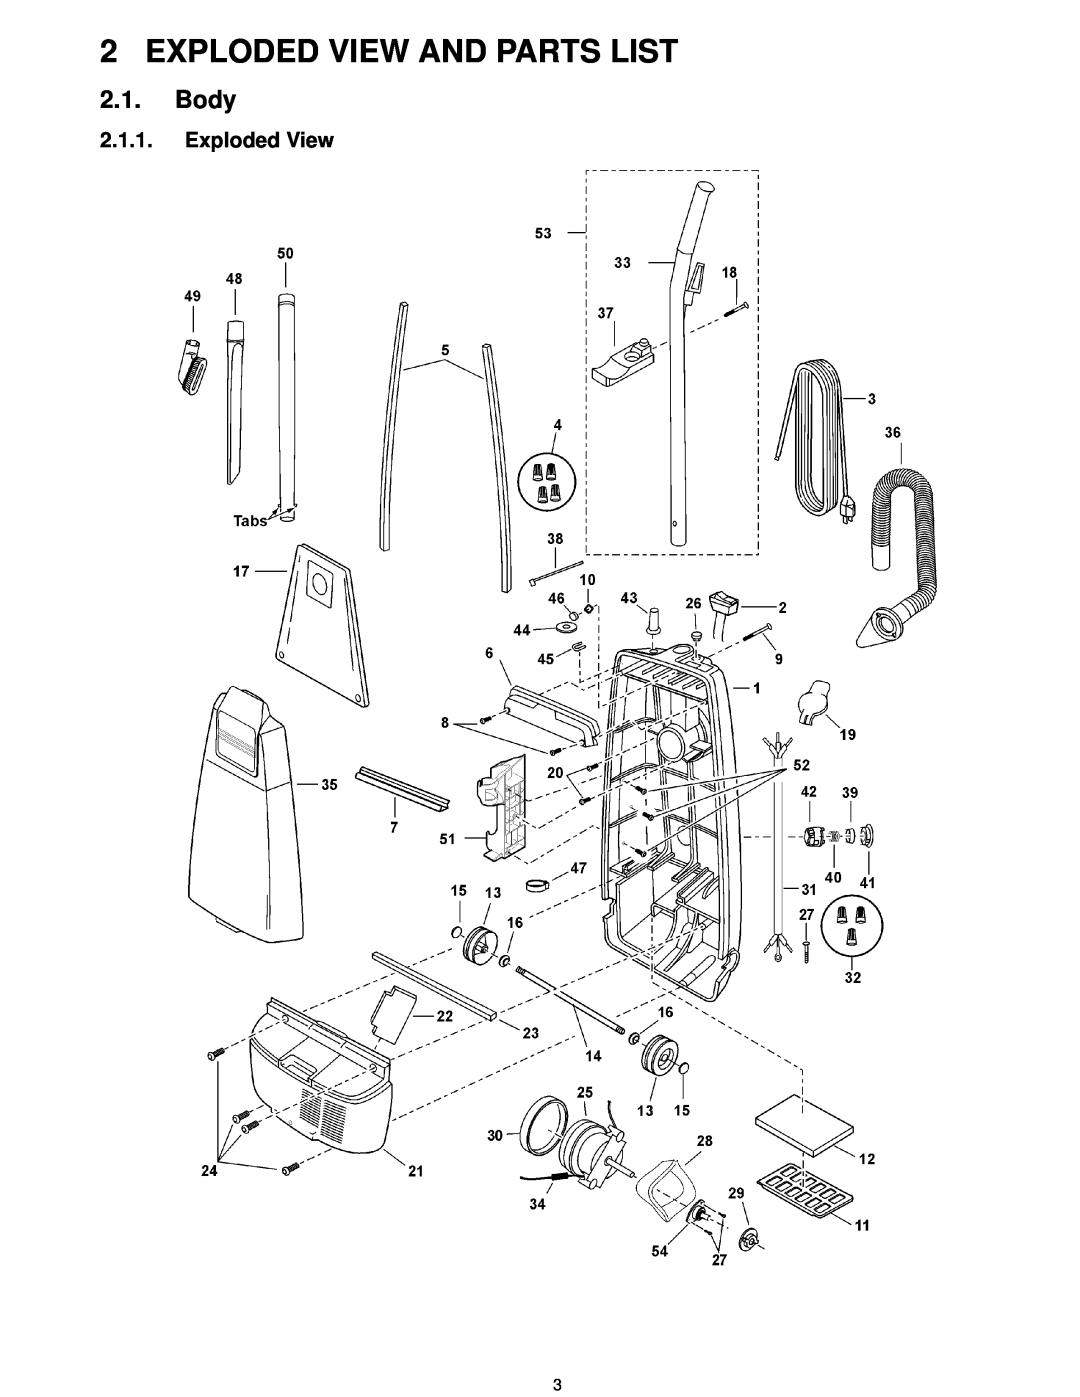 Panasonic MC-V5210-00 specifications Exploded View And Parts List, Body 